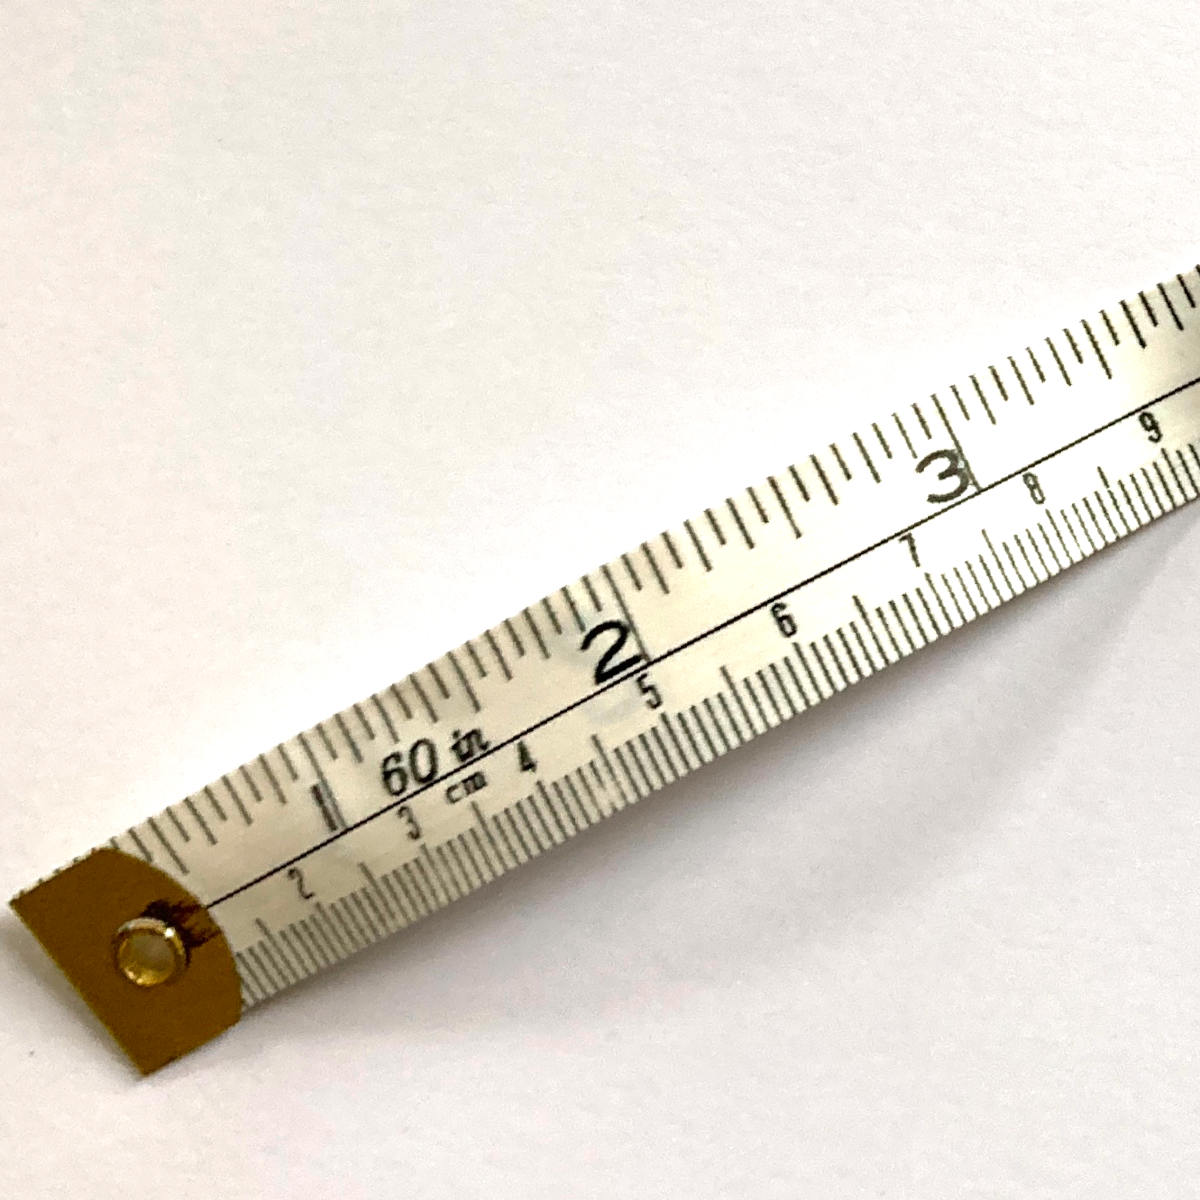 Tape measure - showing inches and centimetres